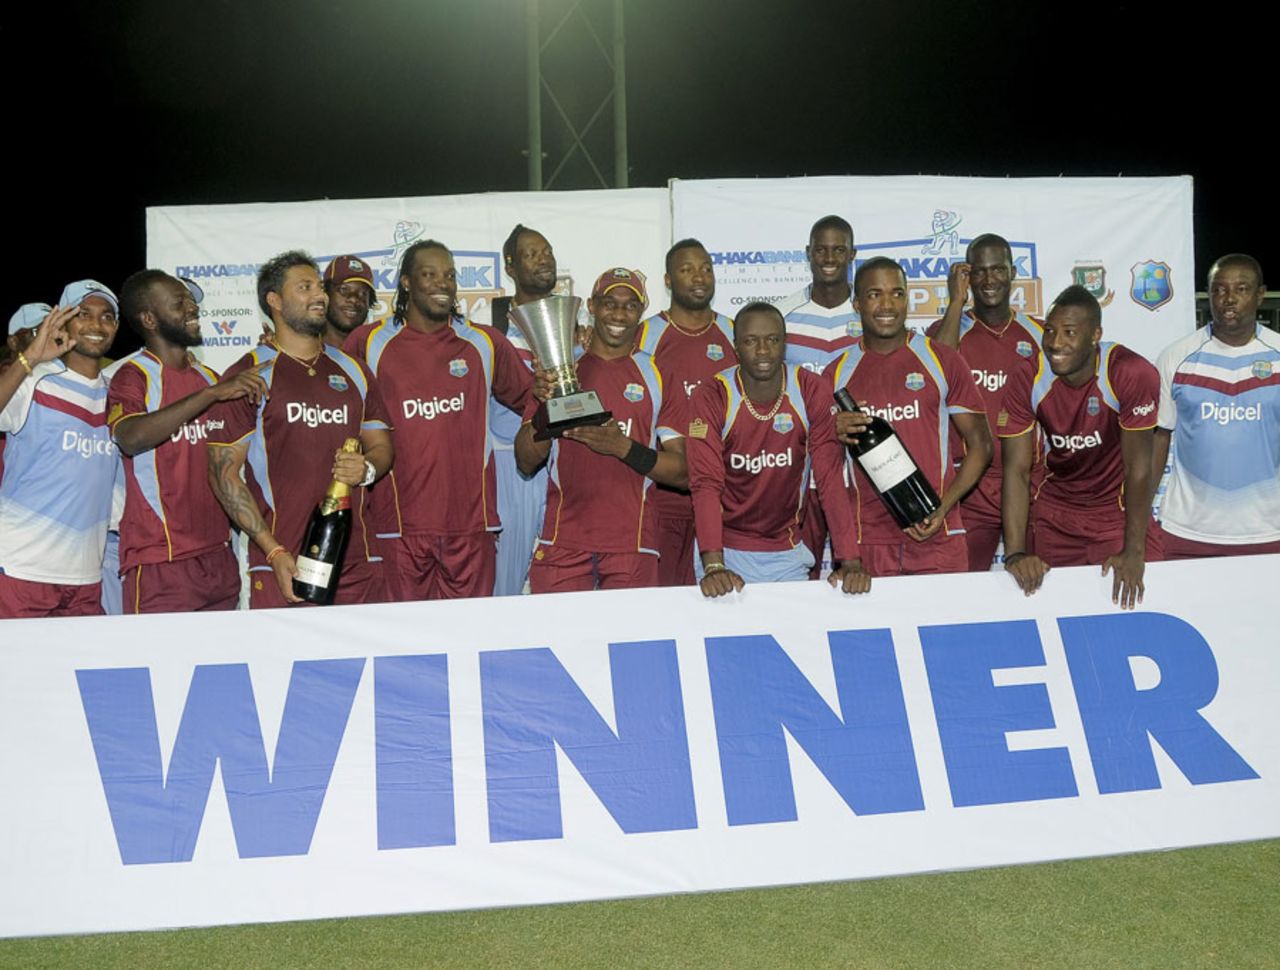 Captain Bravo and his men with the series trophy, West Indies v Bangladesh, 3rd ODI, Basseterre, St Kitts, August 25, 2014